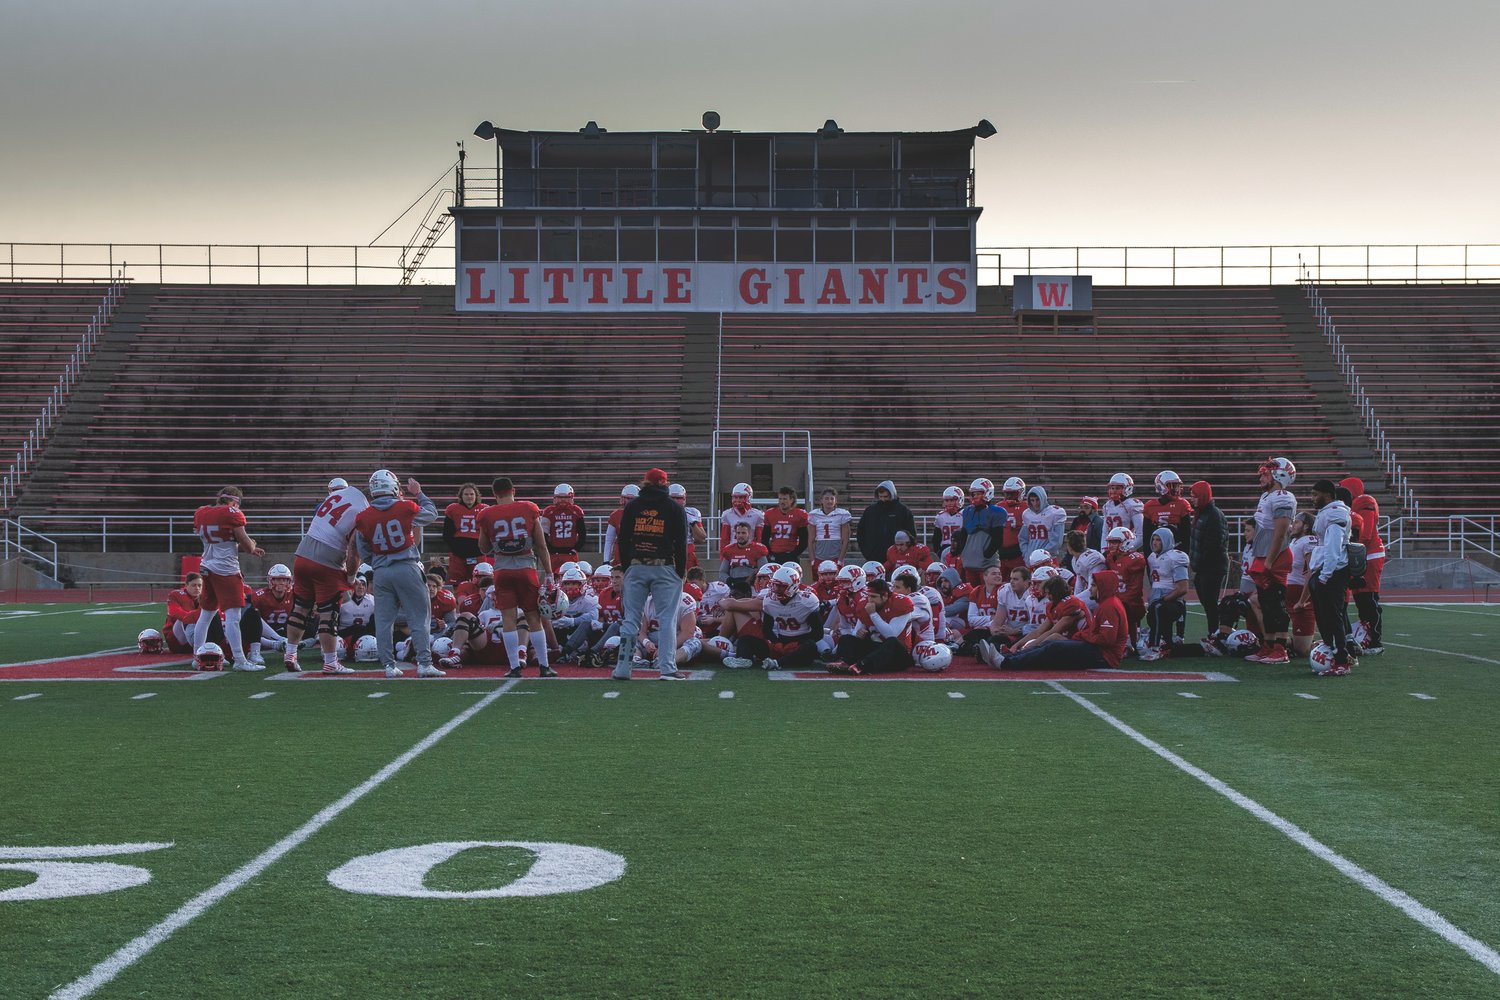 Wabash wraps up the final practice at Little Giant Stadium this past week.